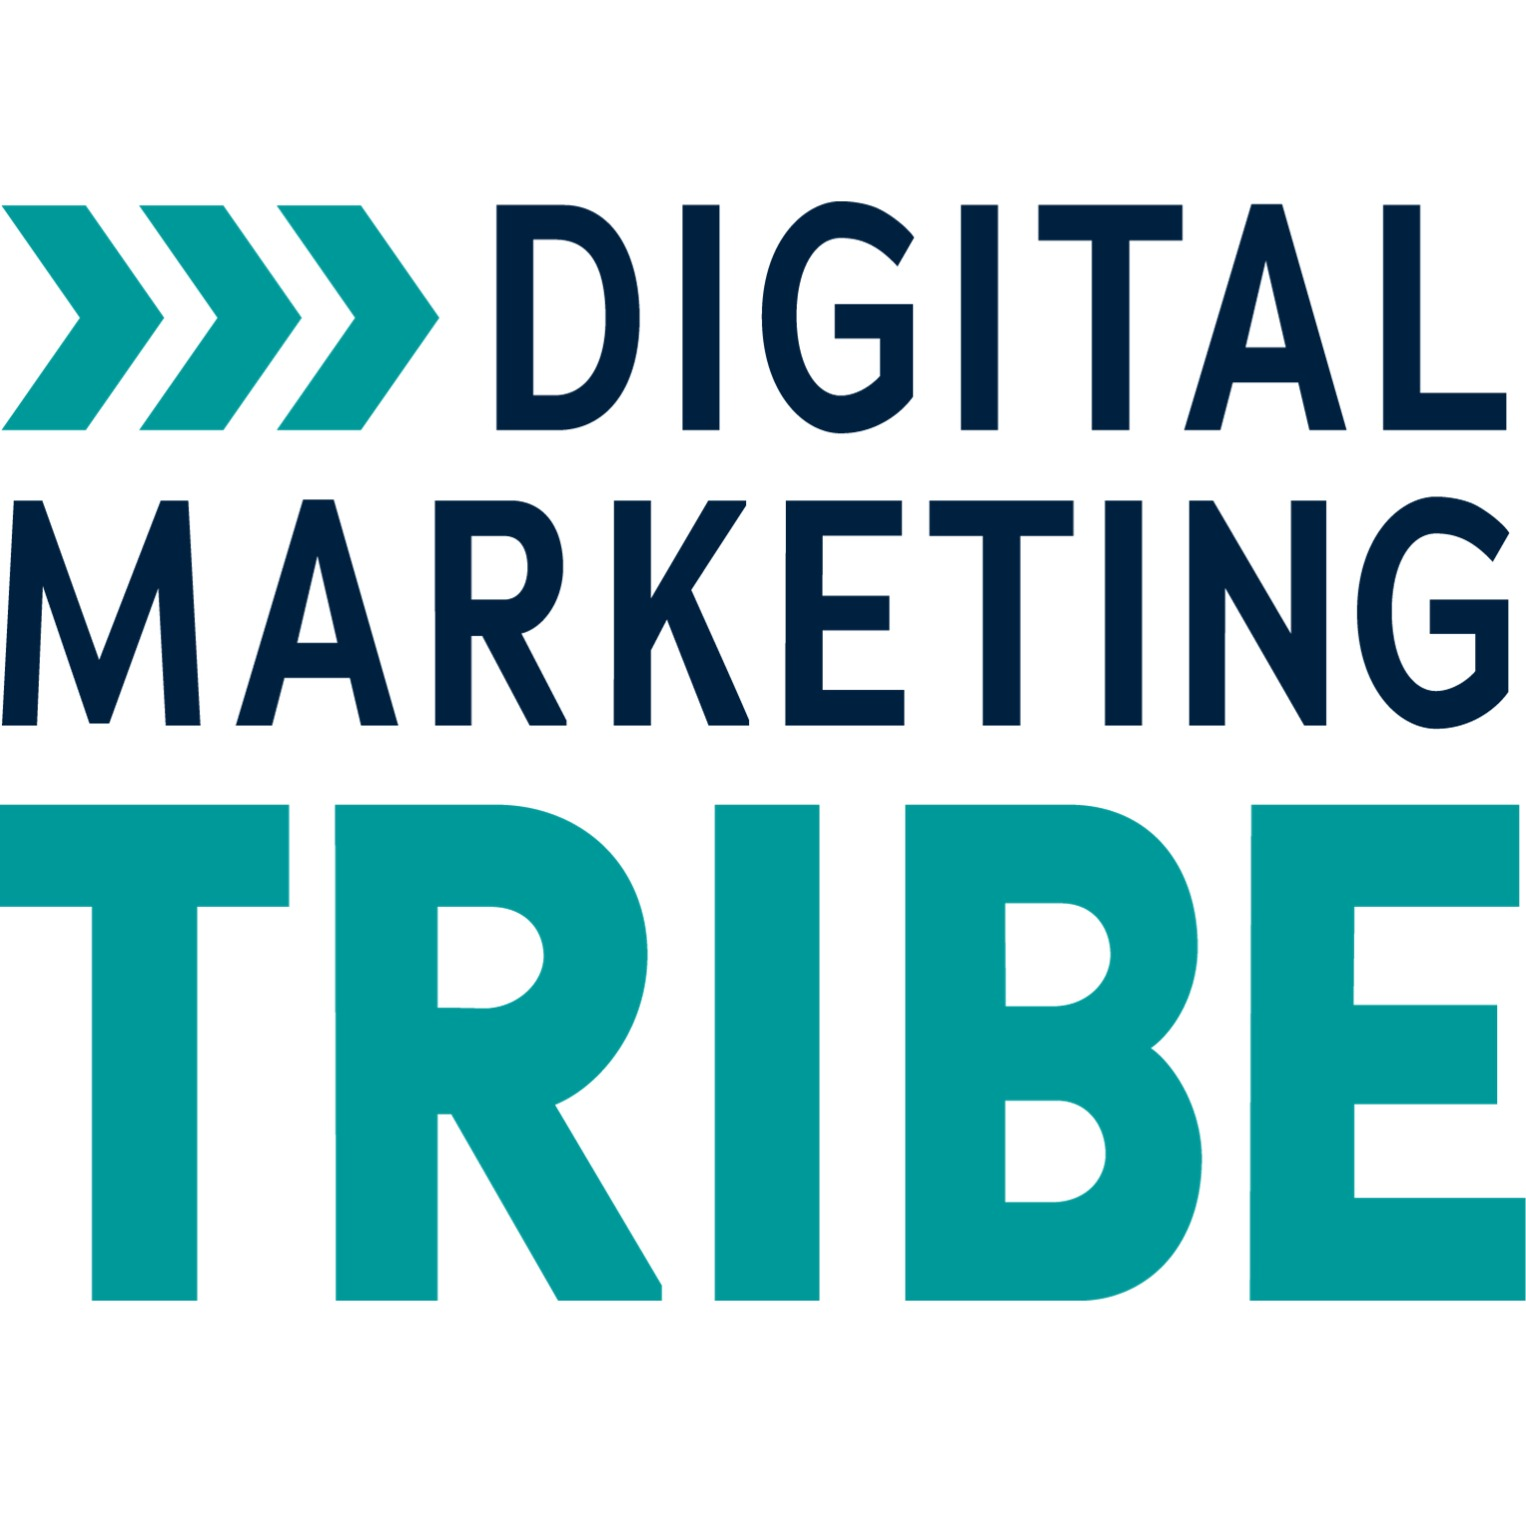 This is a logo of  Digital Marketing Tribe Digital Marketing Tribe Sydney 0424 953 774